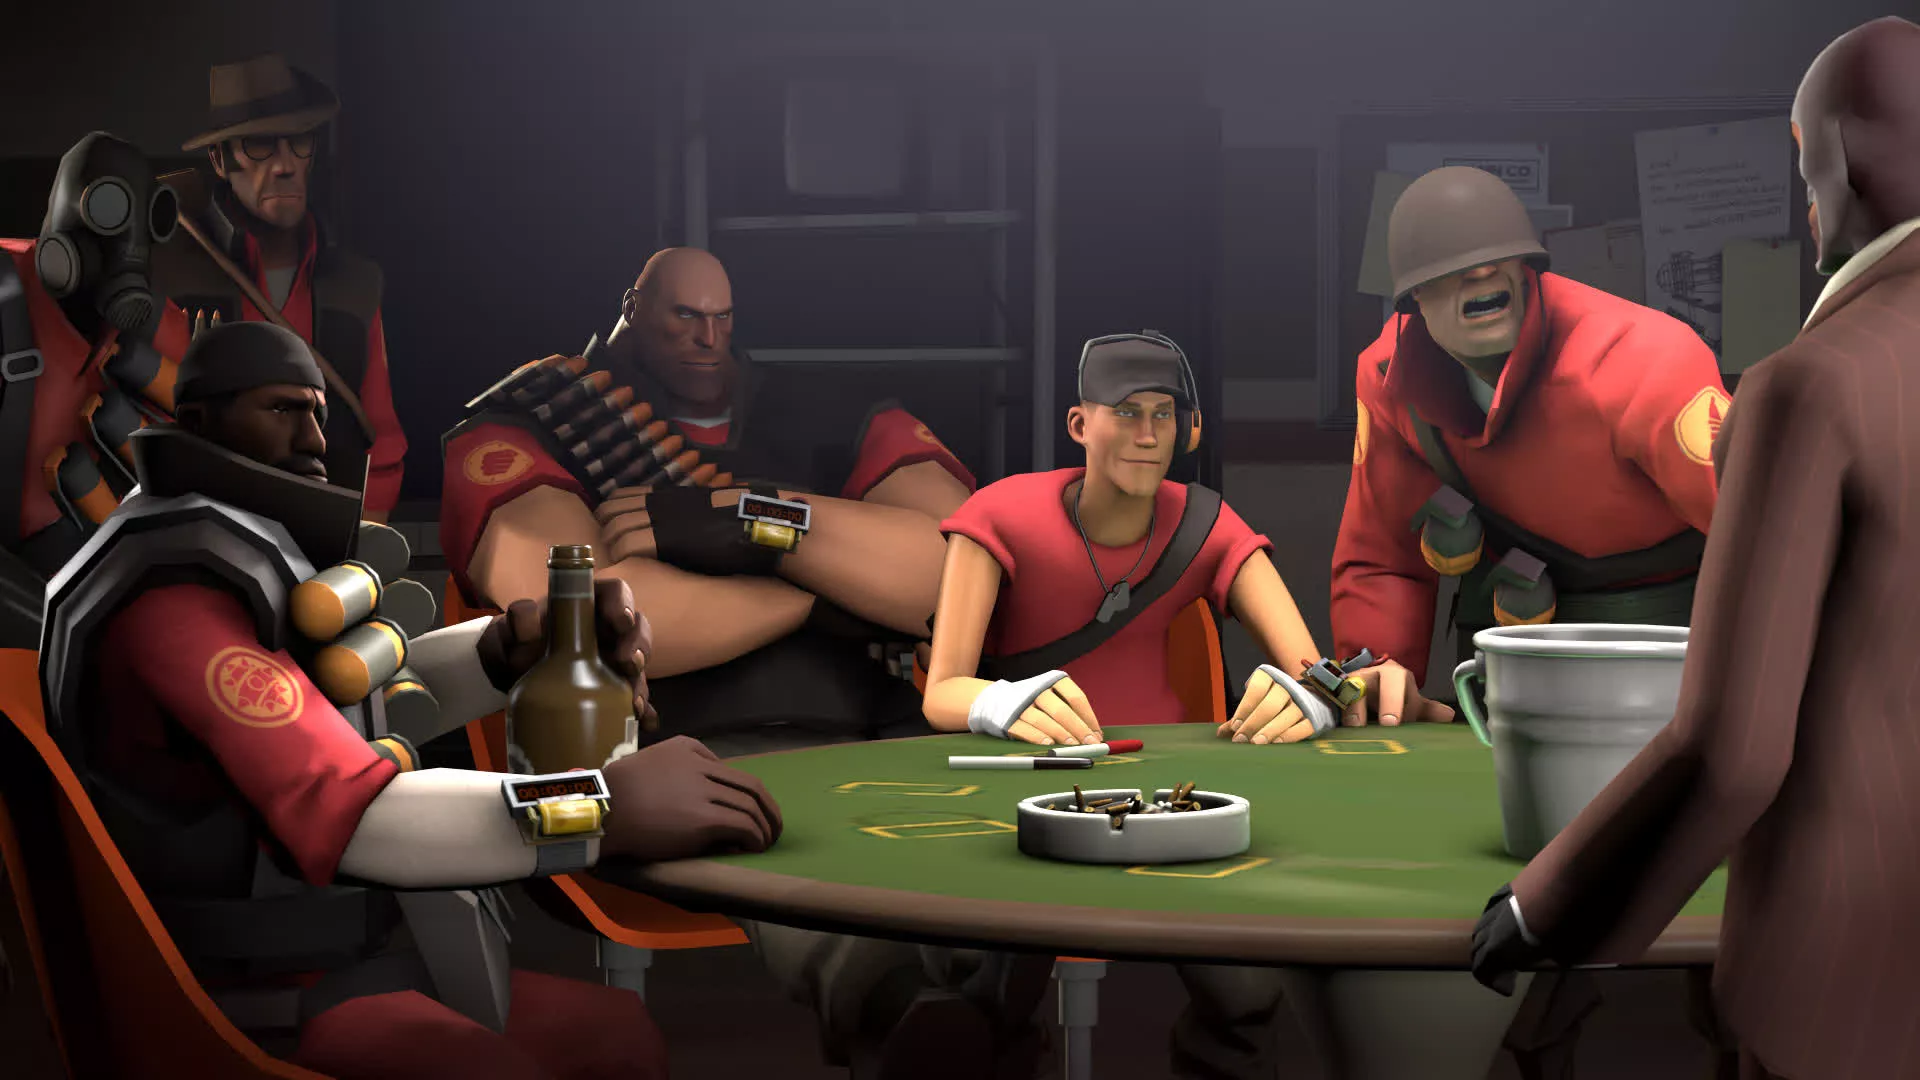 Team Fortress 2 just peaked at 150,000 players on Steam, a new record